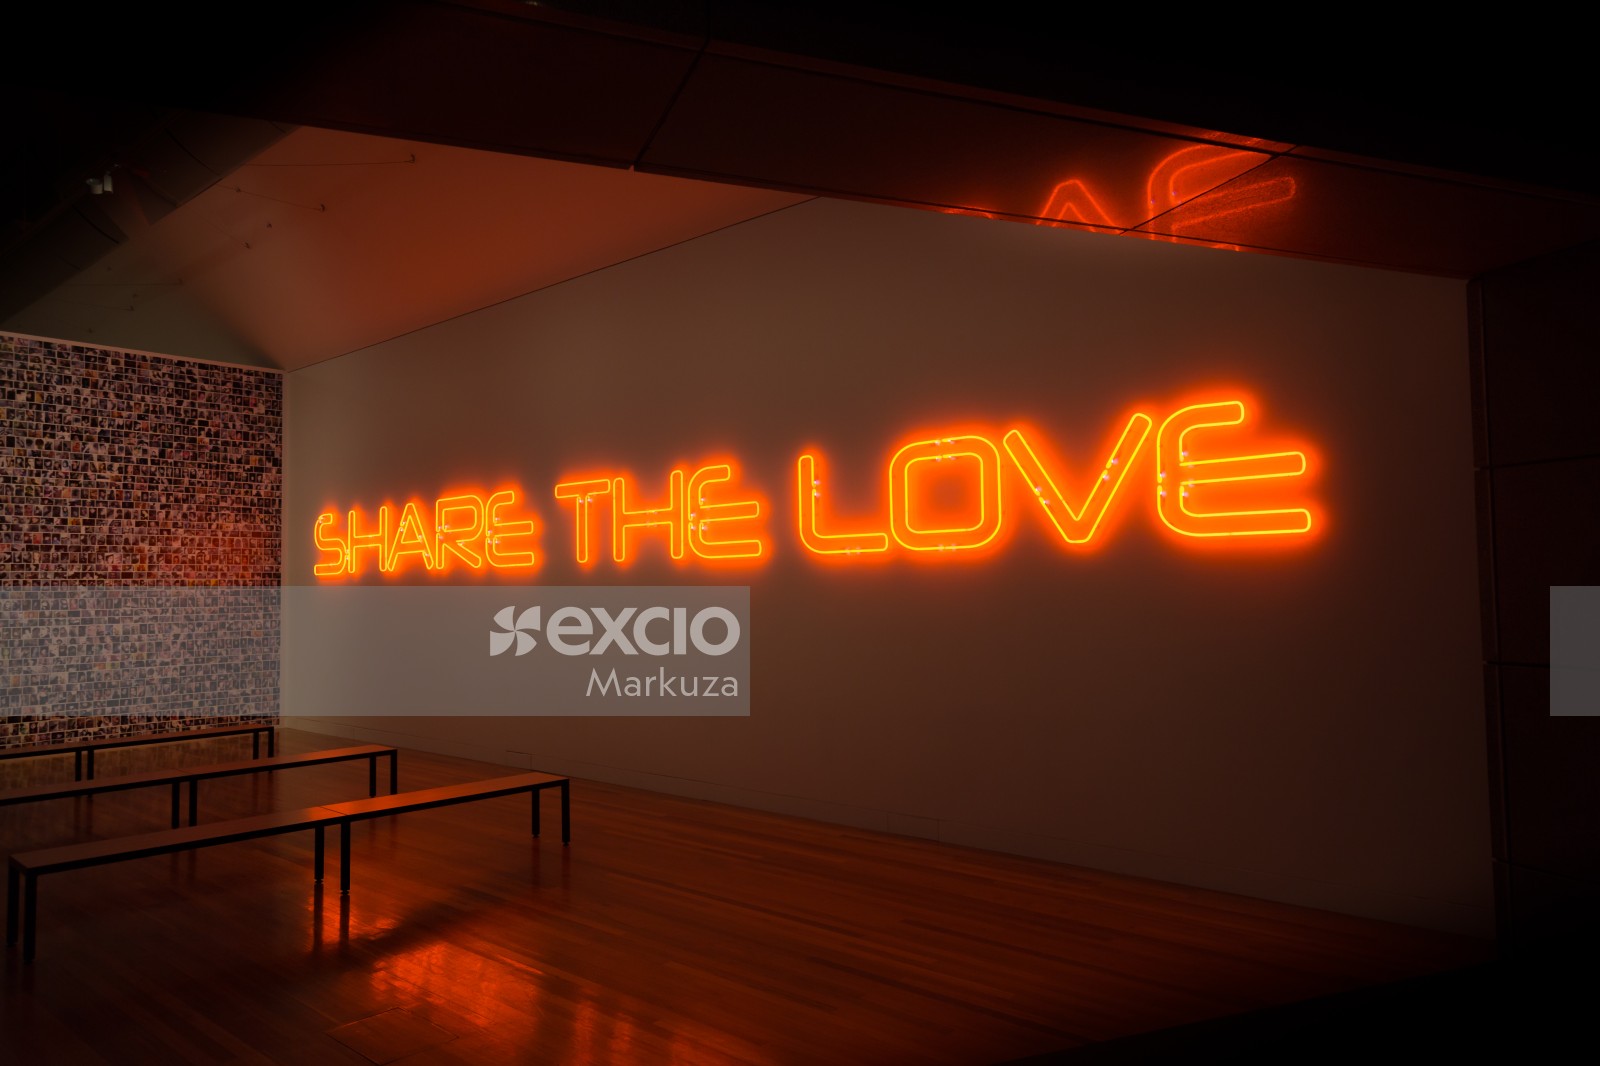 Share the love neon sign